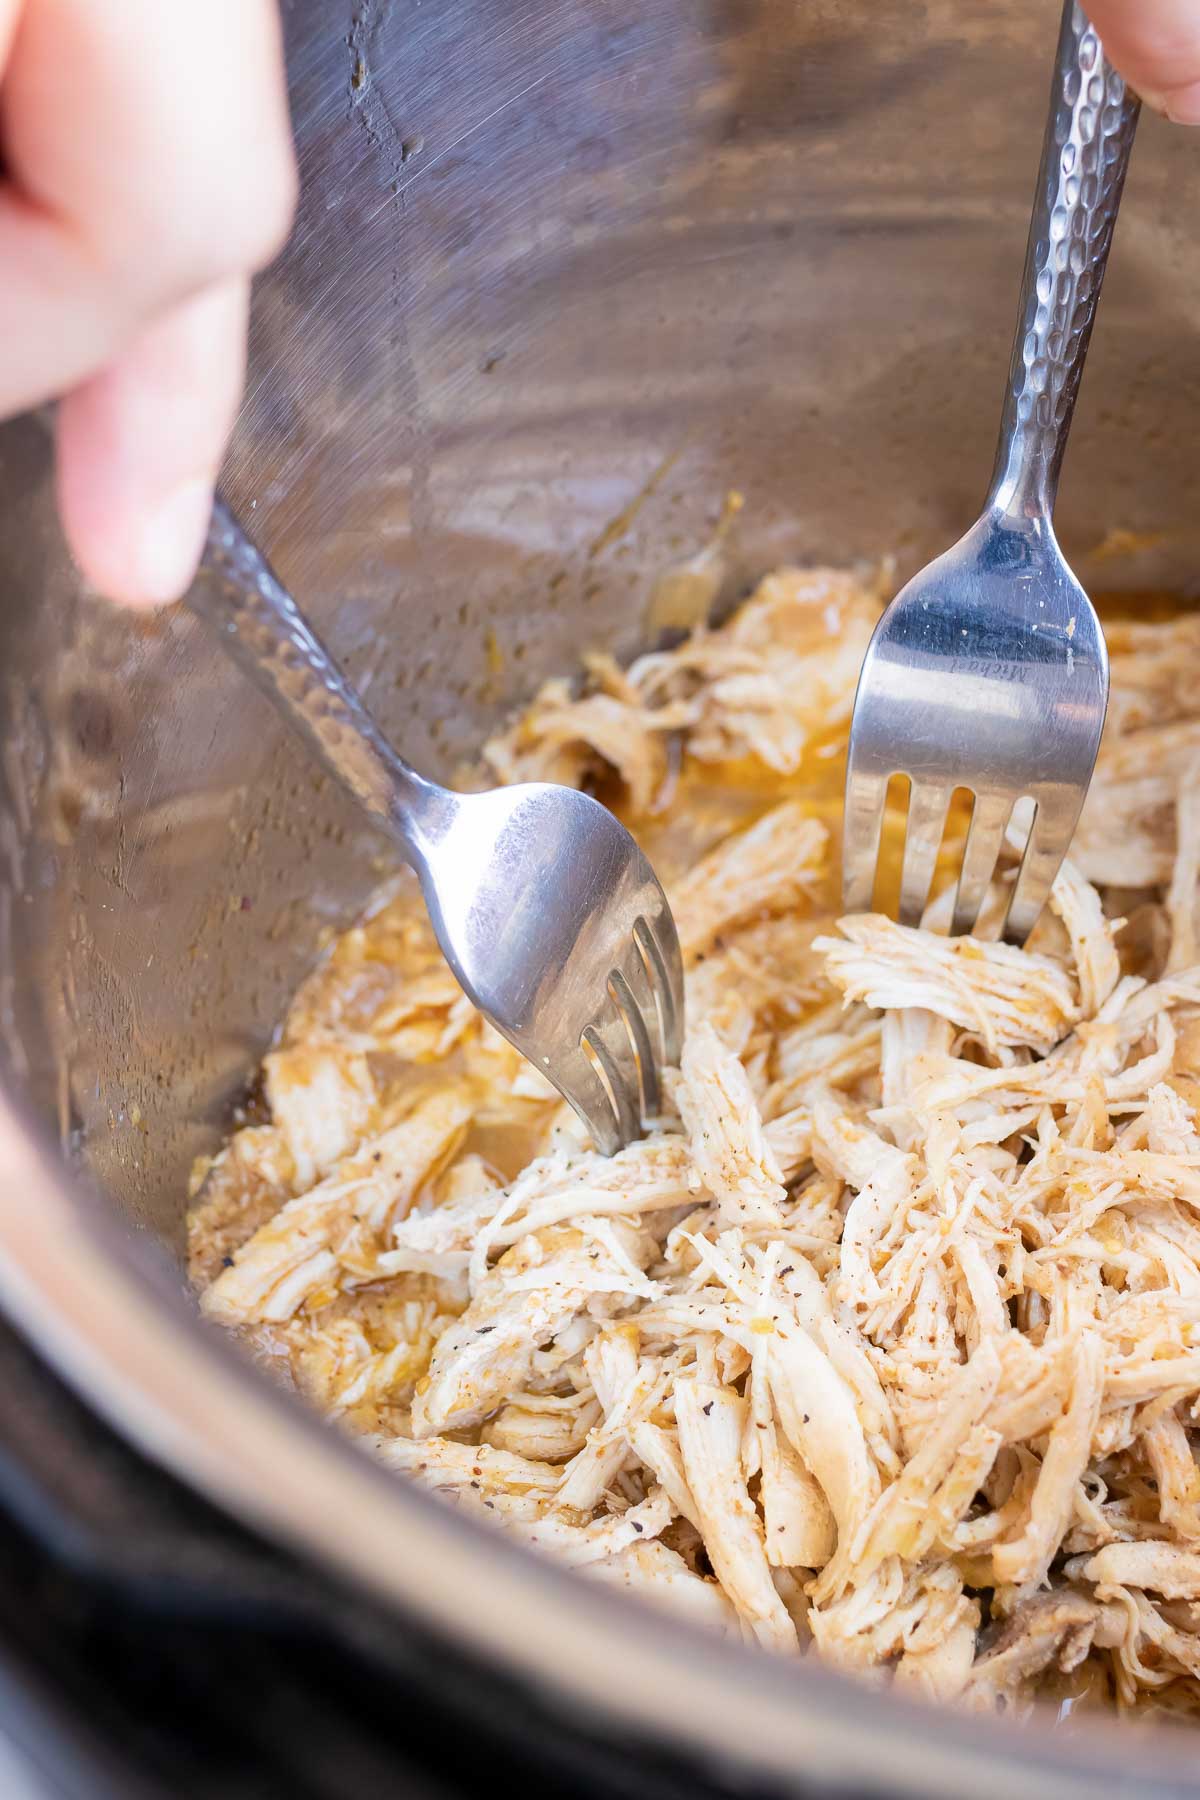 Forks are used to shred the chicken in the Instant Pot.